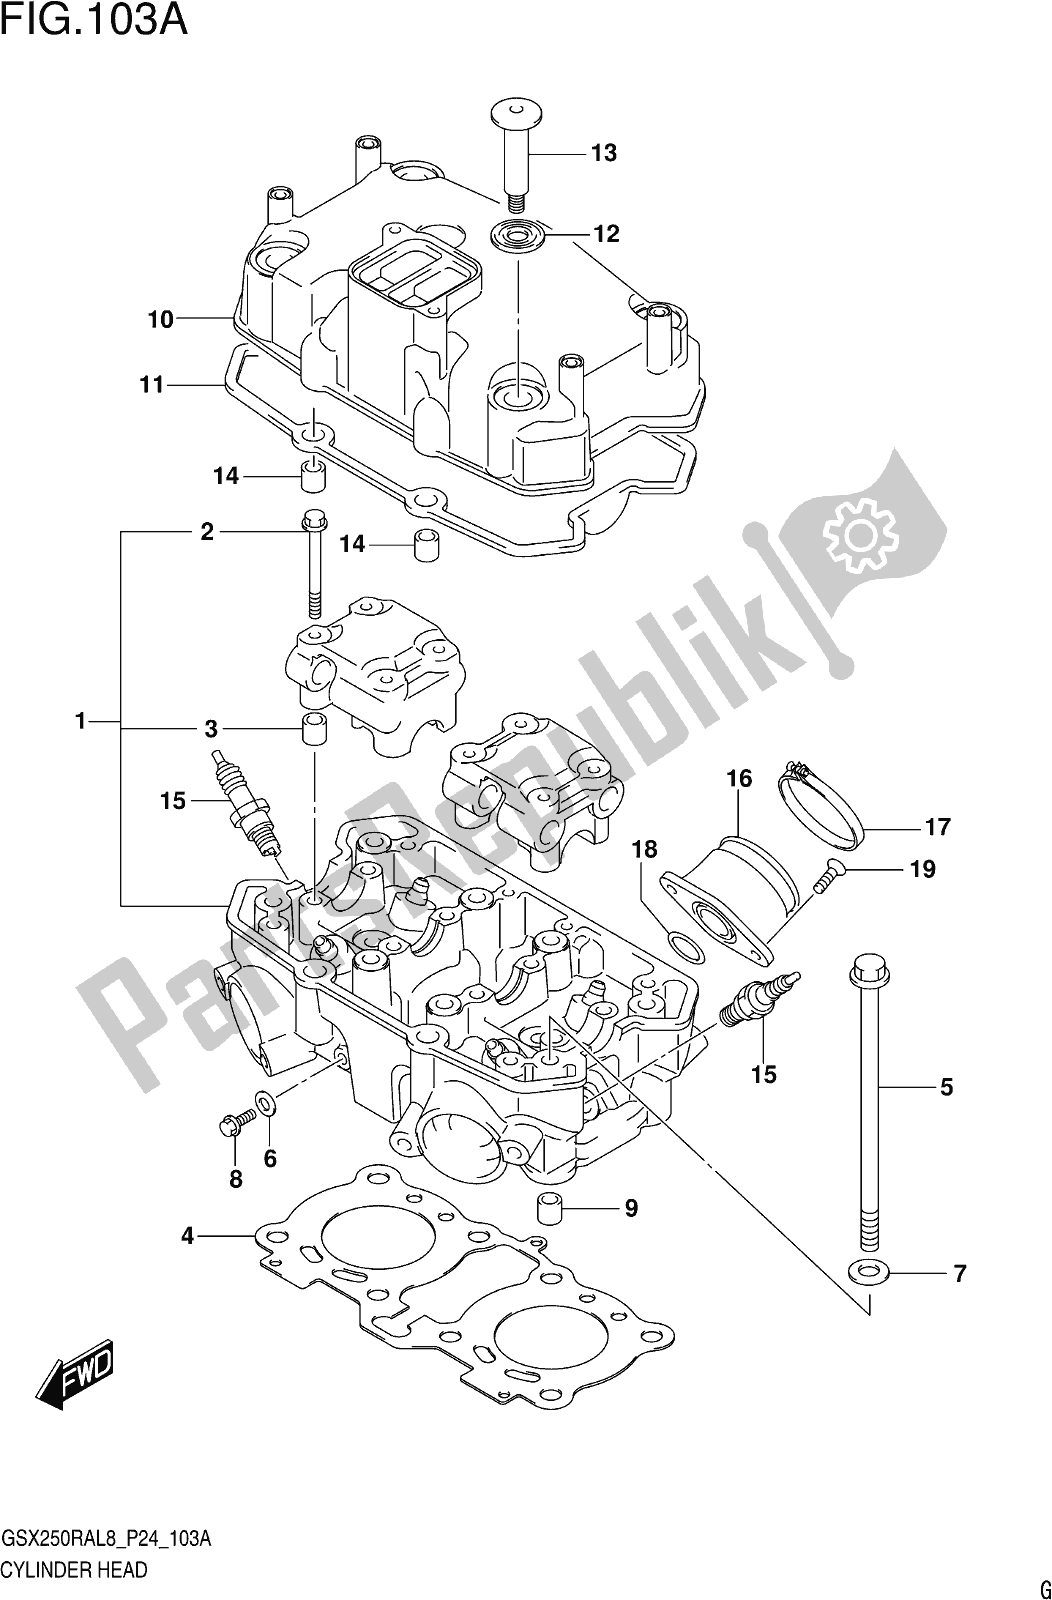 All parts for the Fig. 103a Cylinder Head of the Suzuki GW 250 RA 2018